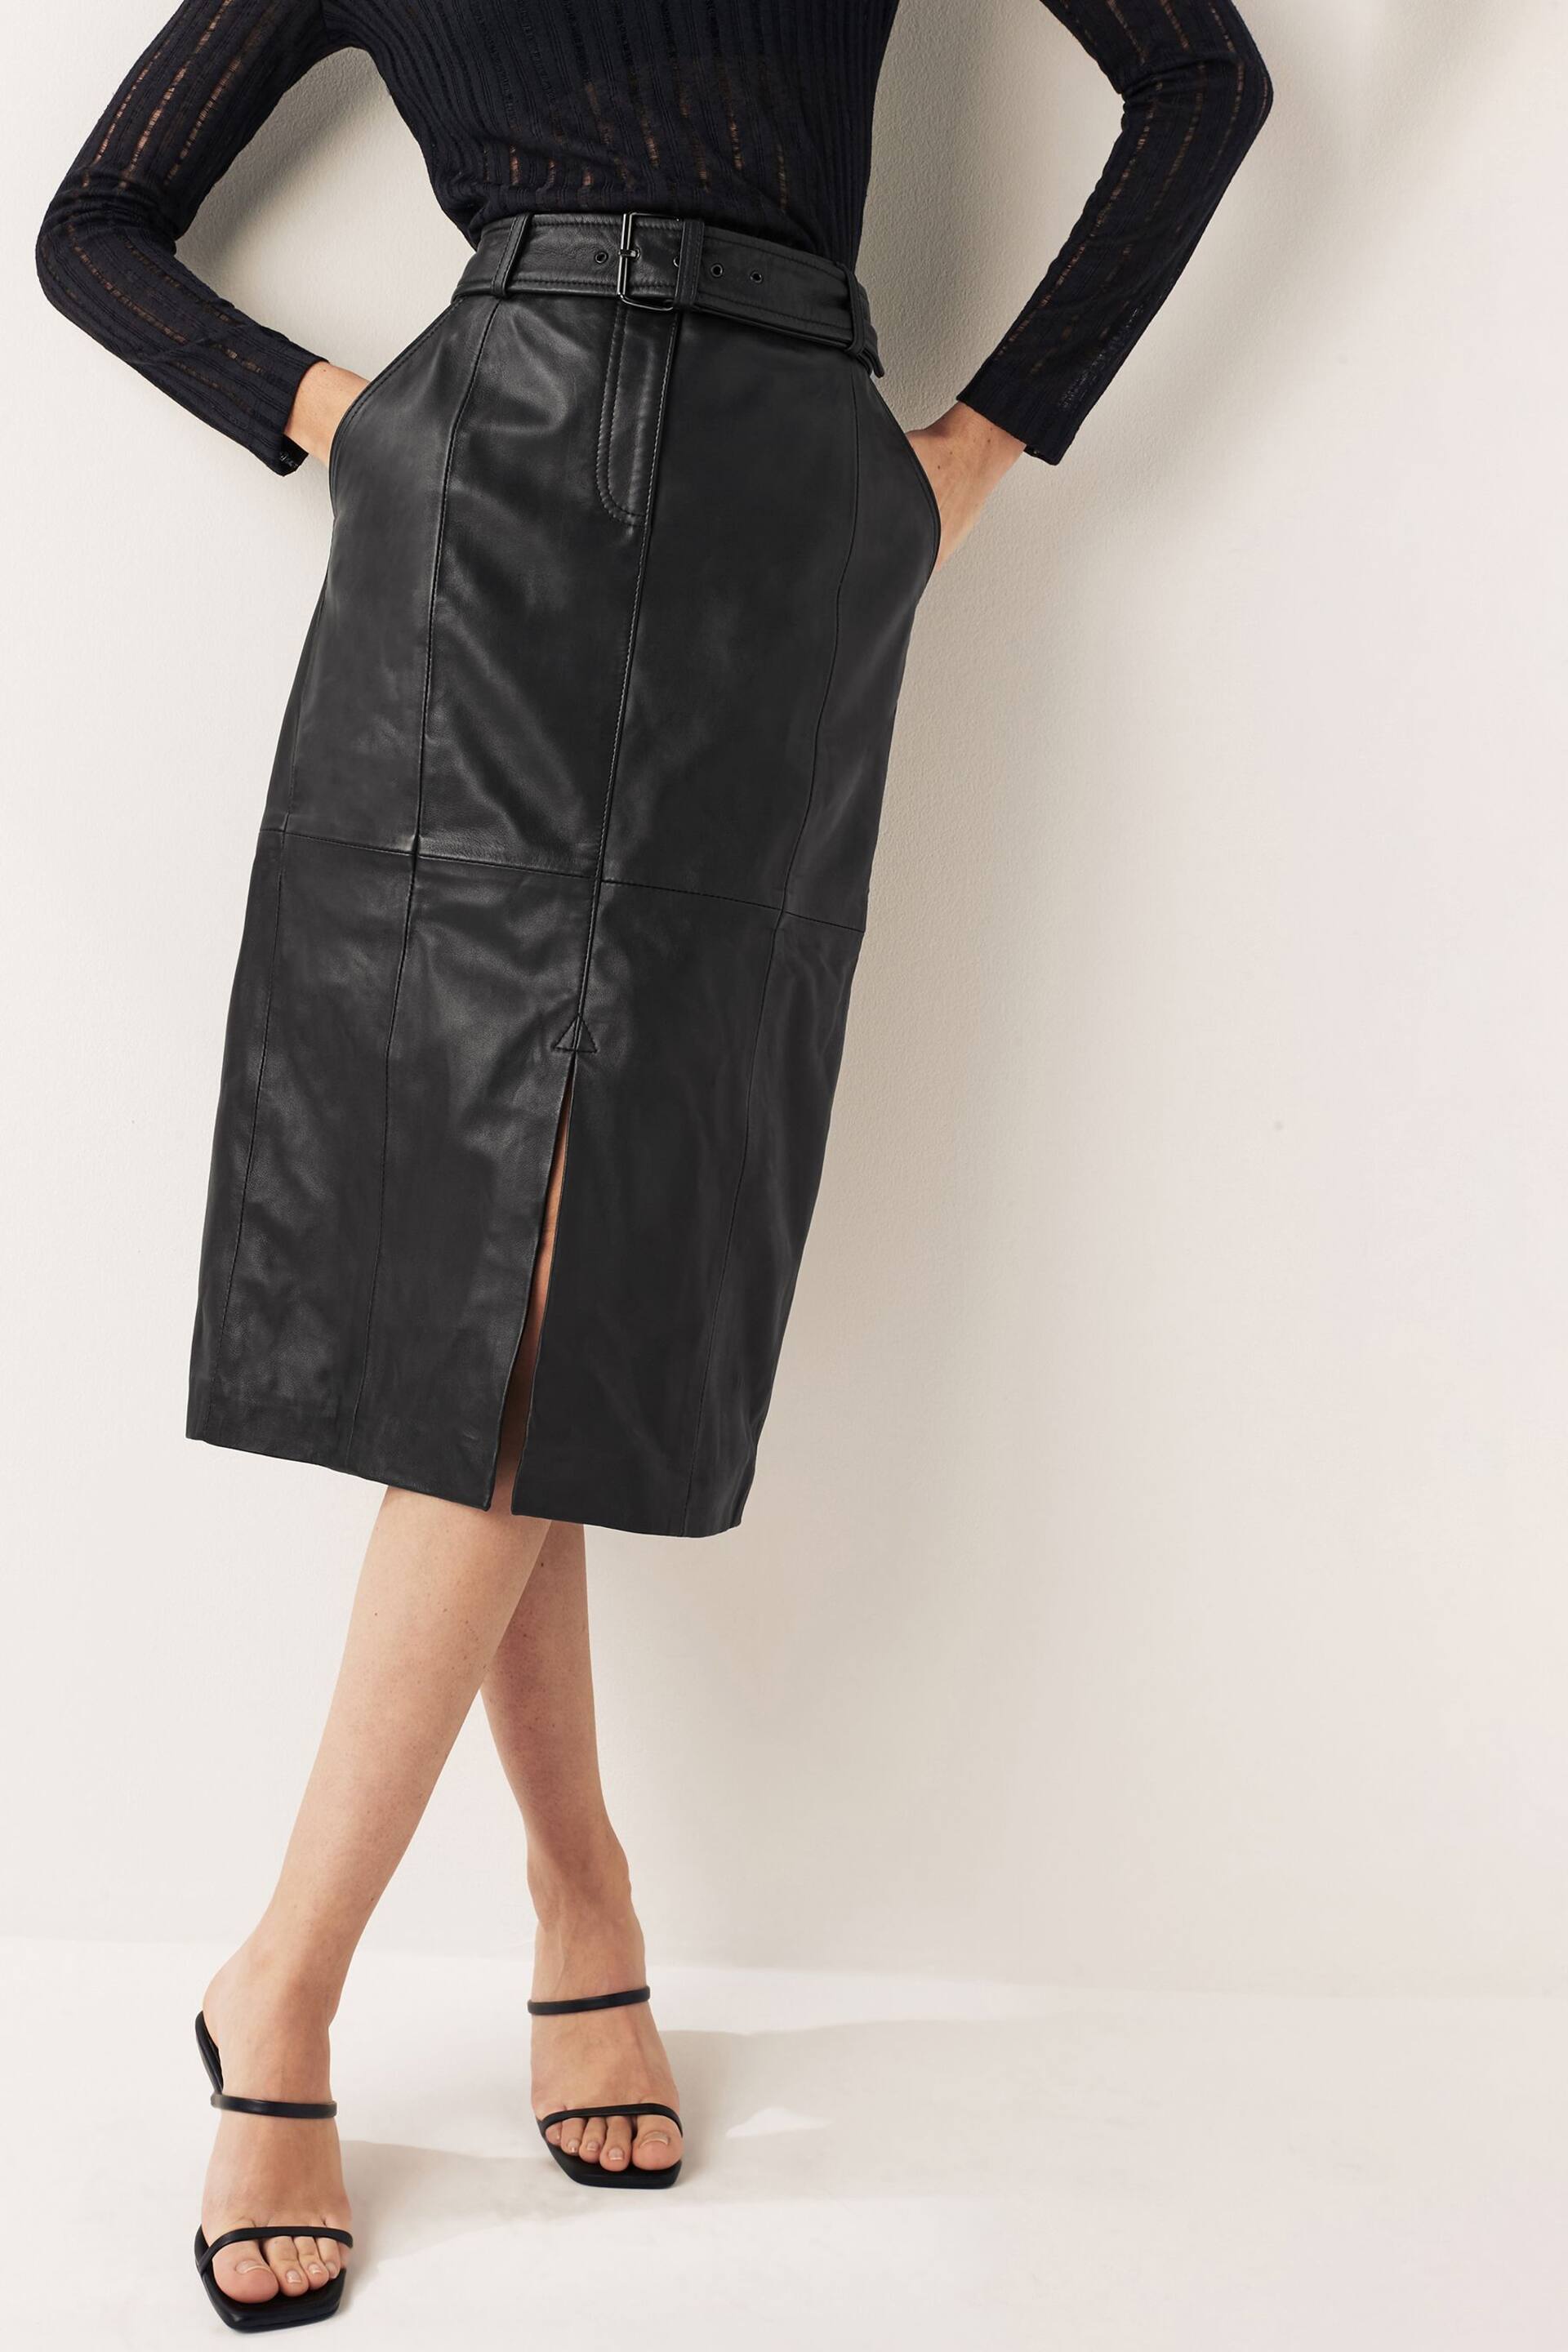 Urban Code Black Leather Front Split Midi Skirt With Removable Belt - Image 1 of 7